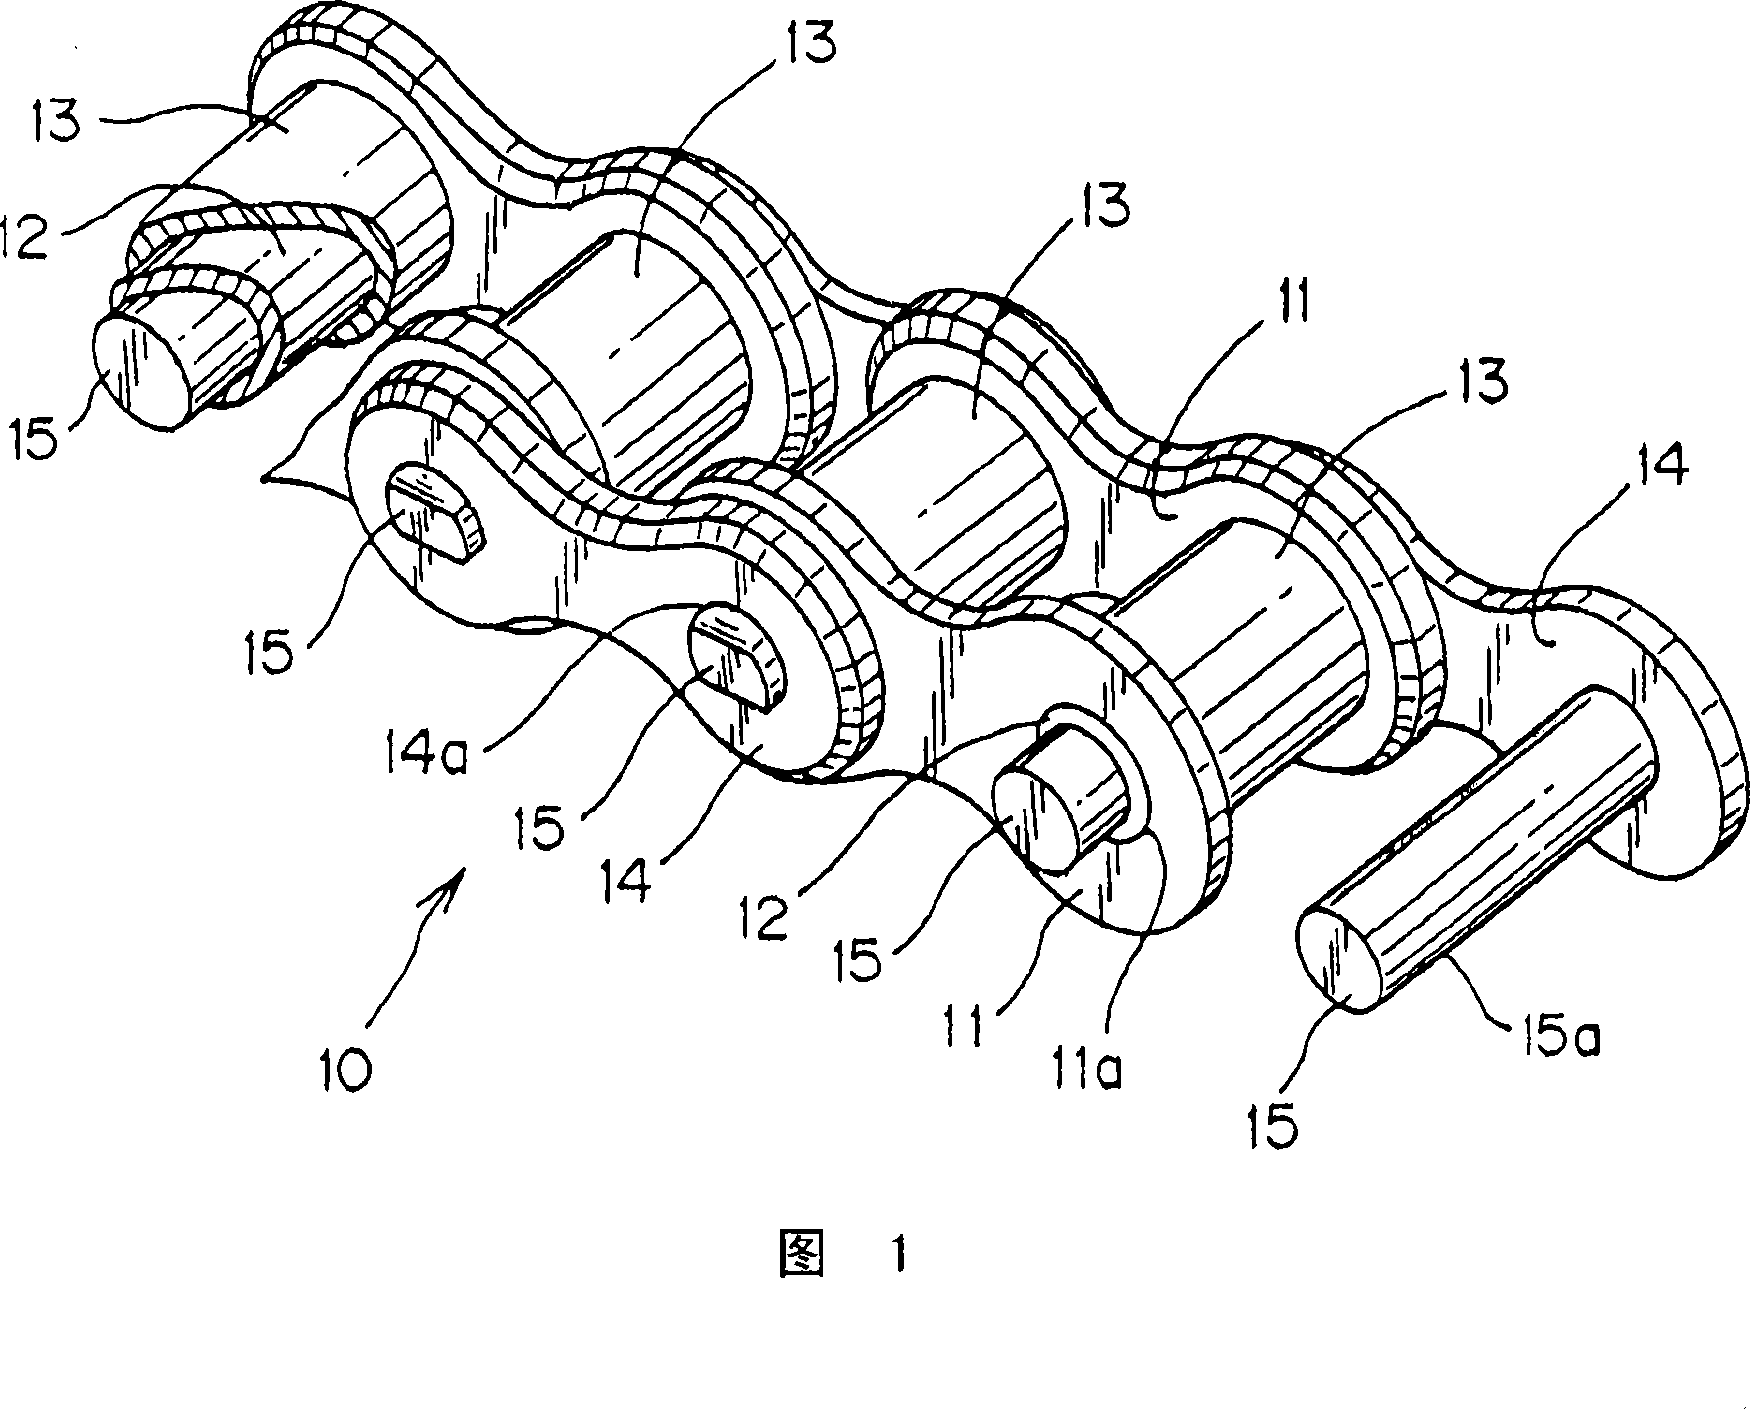 Chain for automobile engine